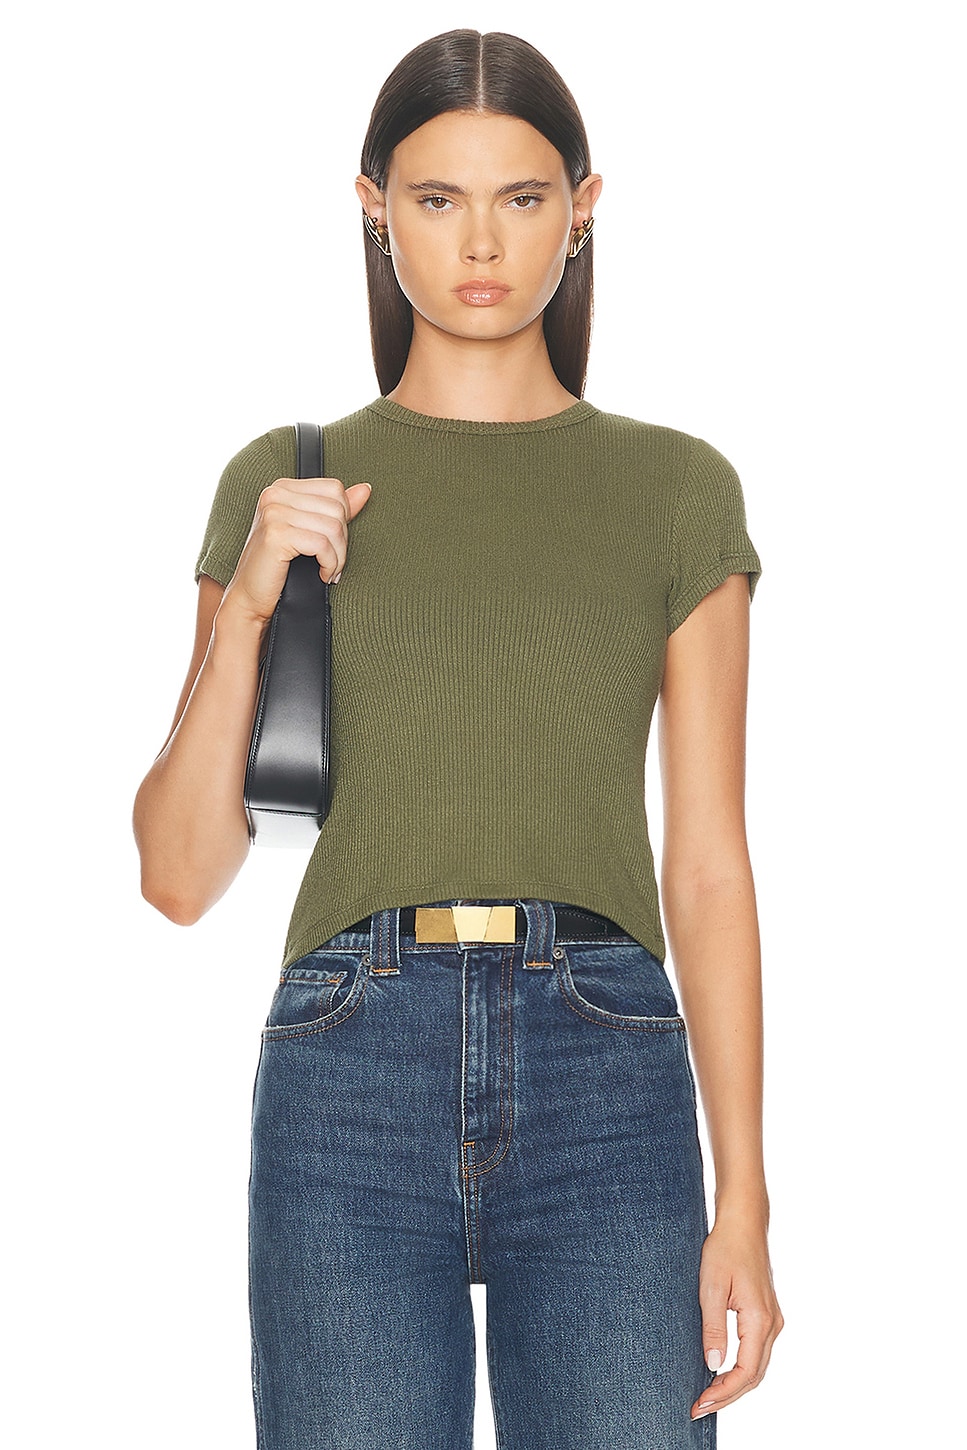 Image 1 of SABLYN Yael Cropped Crew Neck Baby Tee Top in Olive